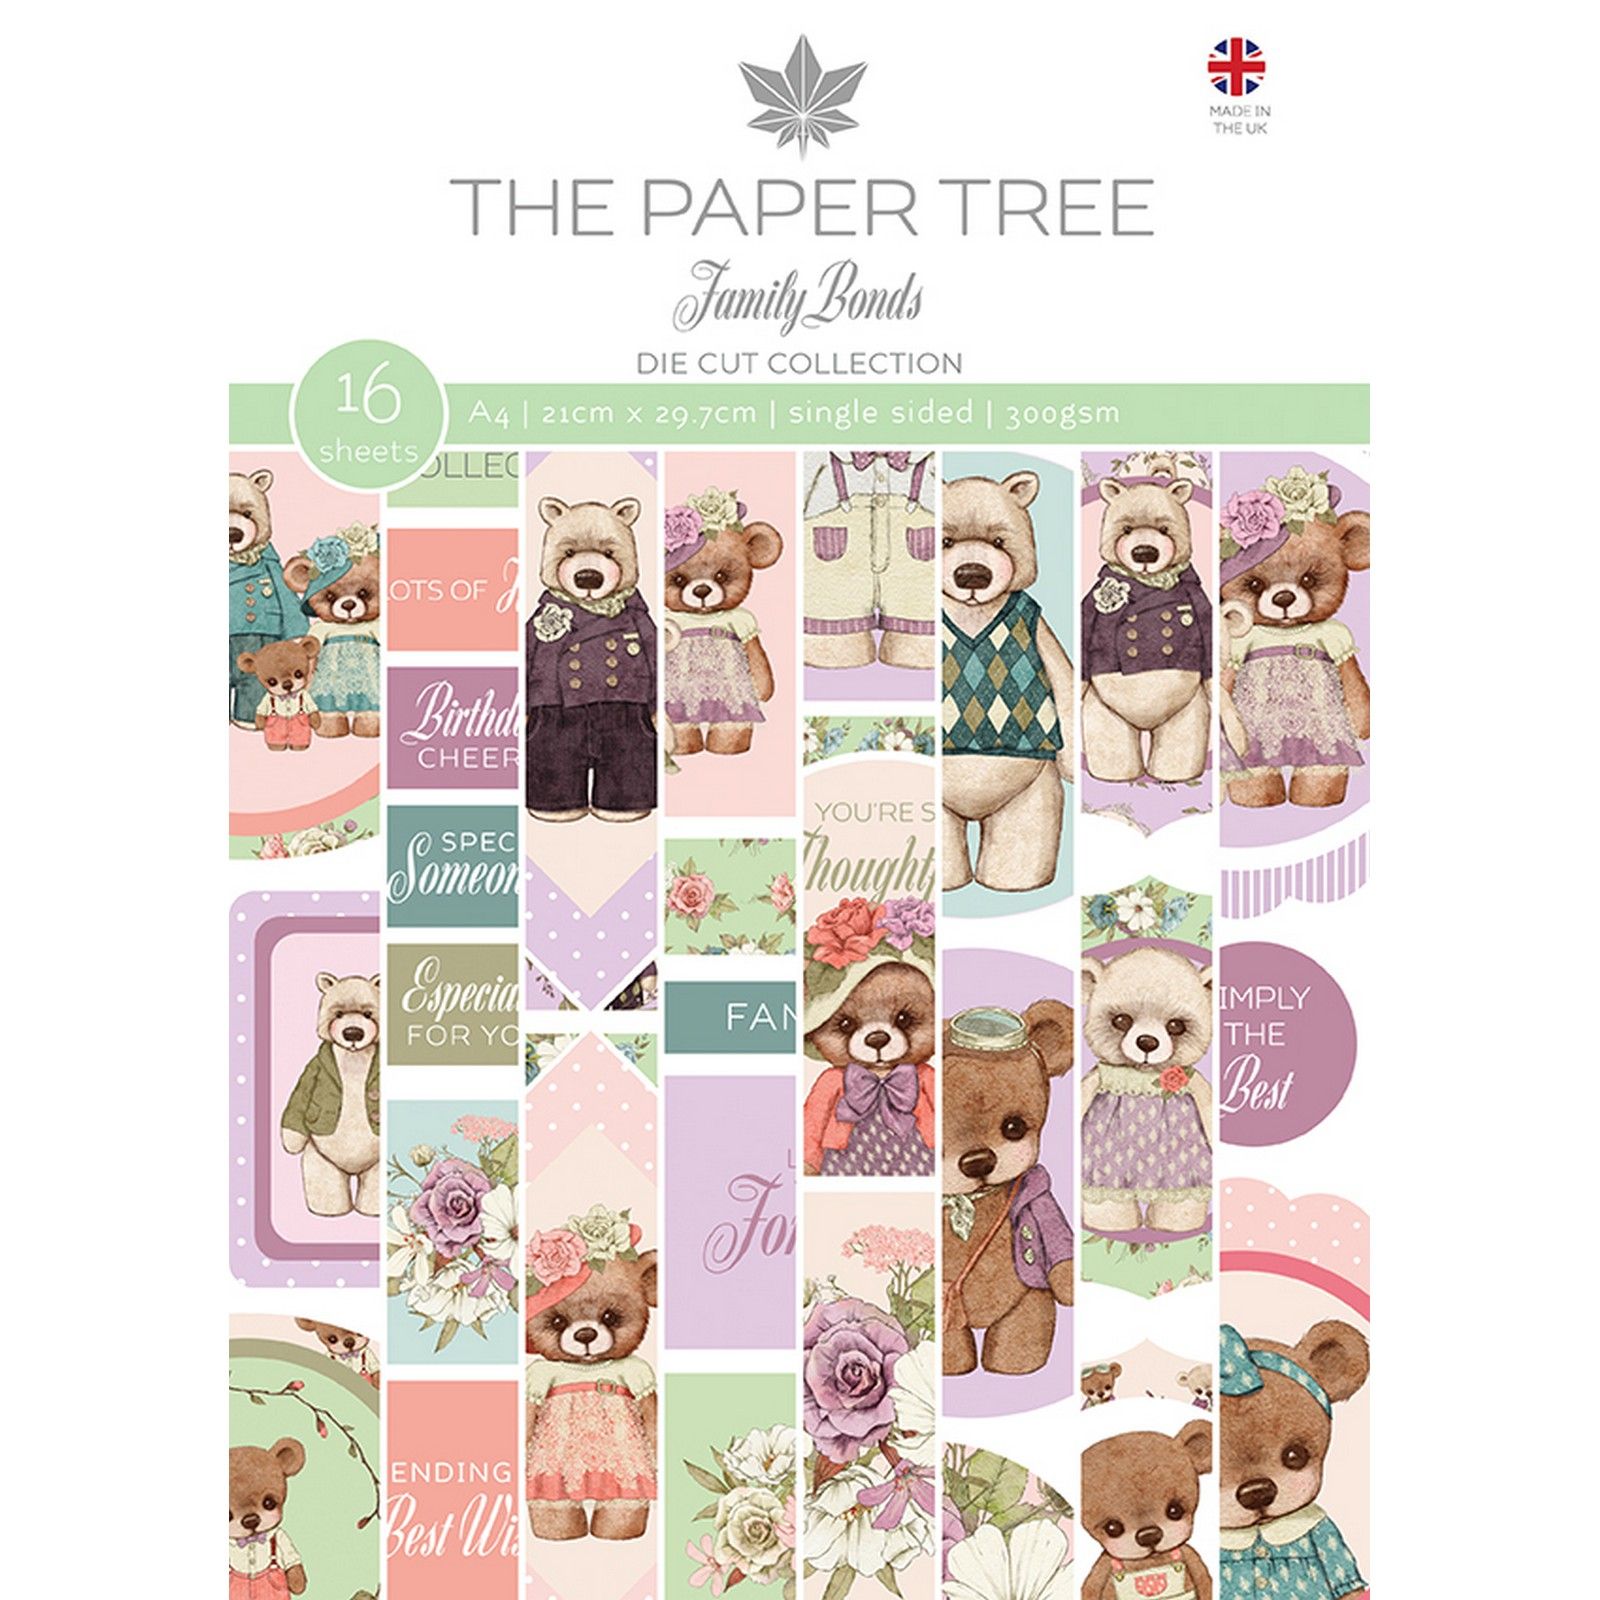 The Paper Tree • Family bonds die cut collection 